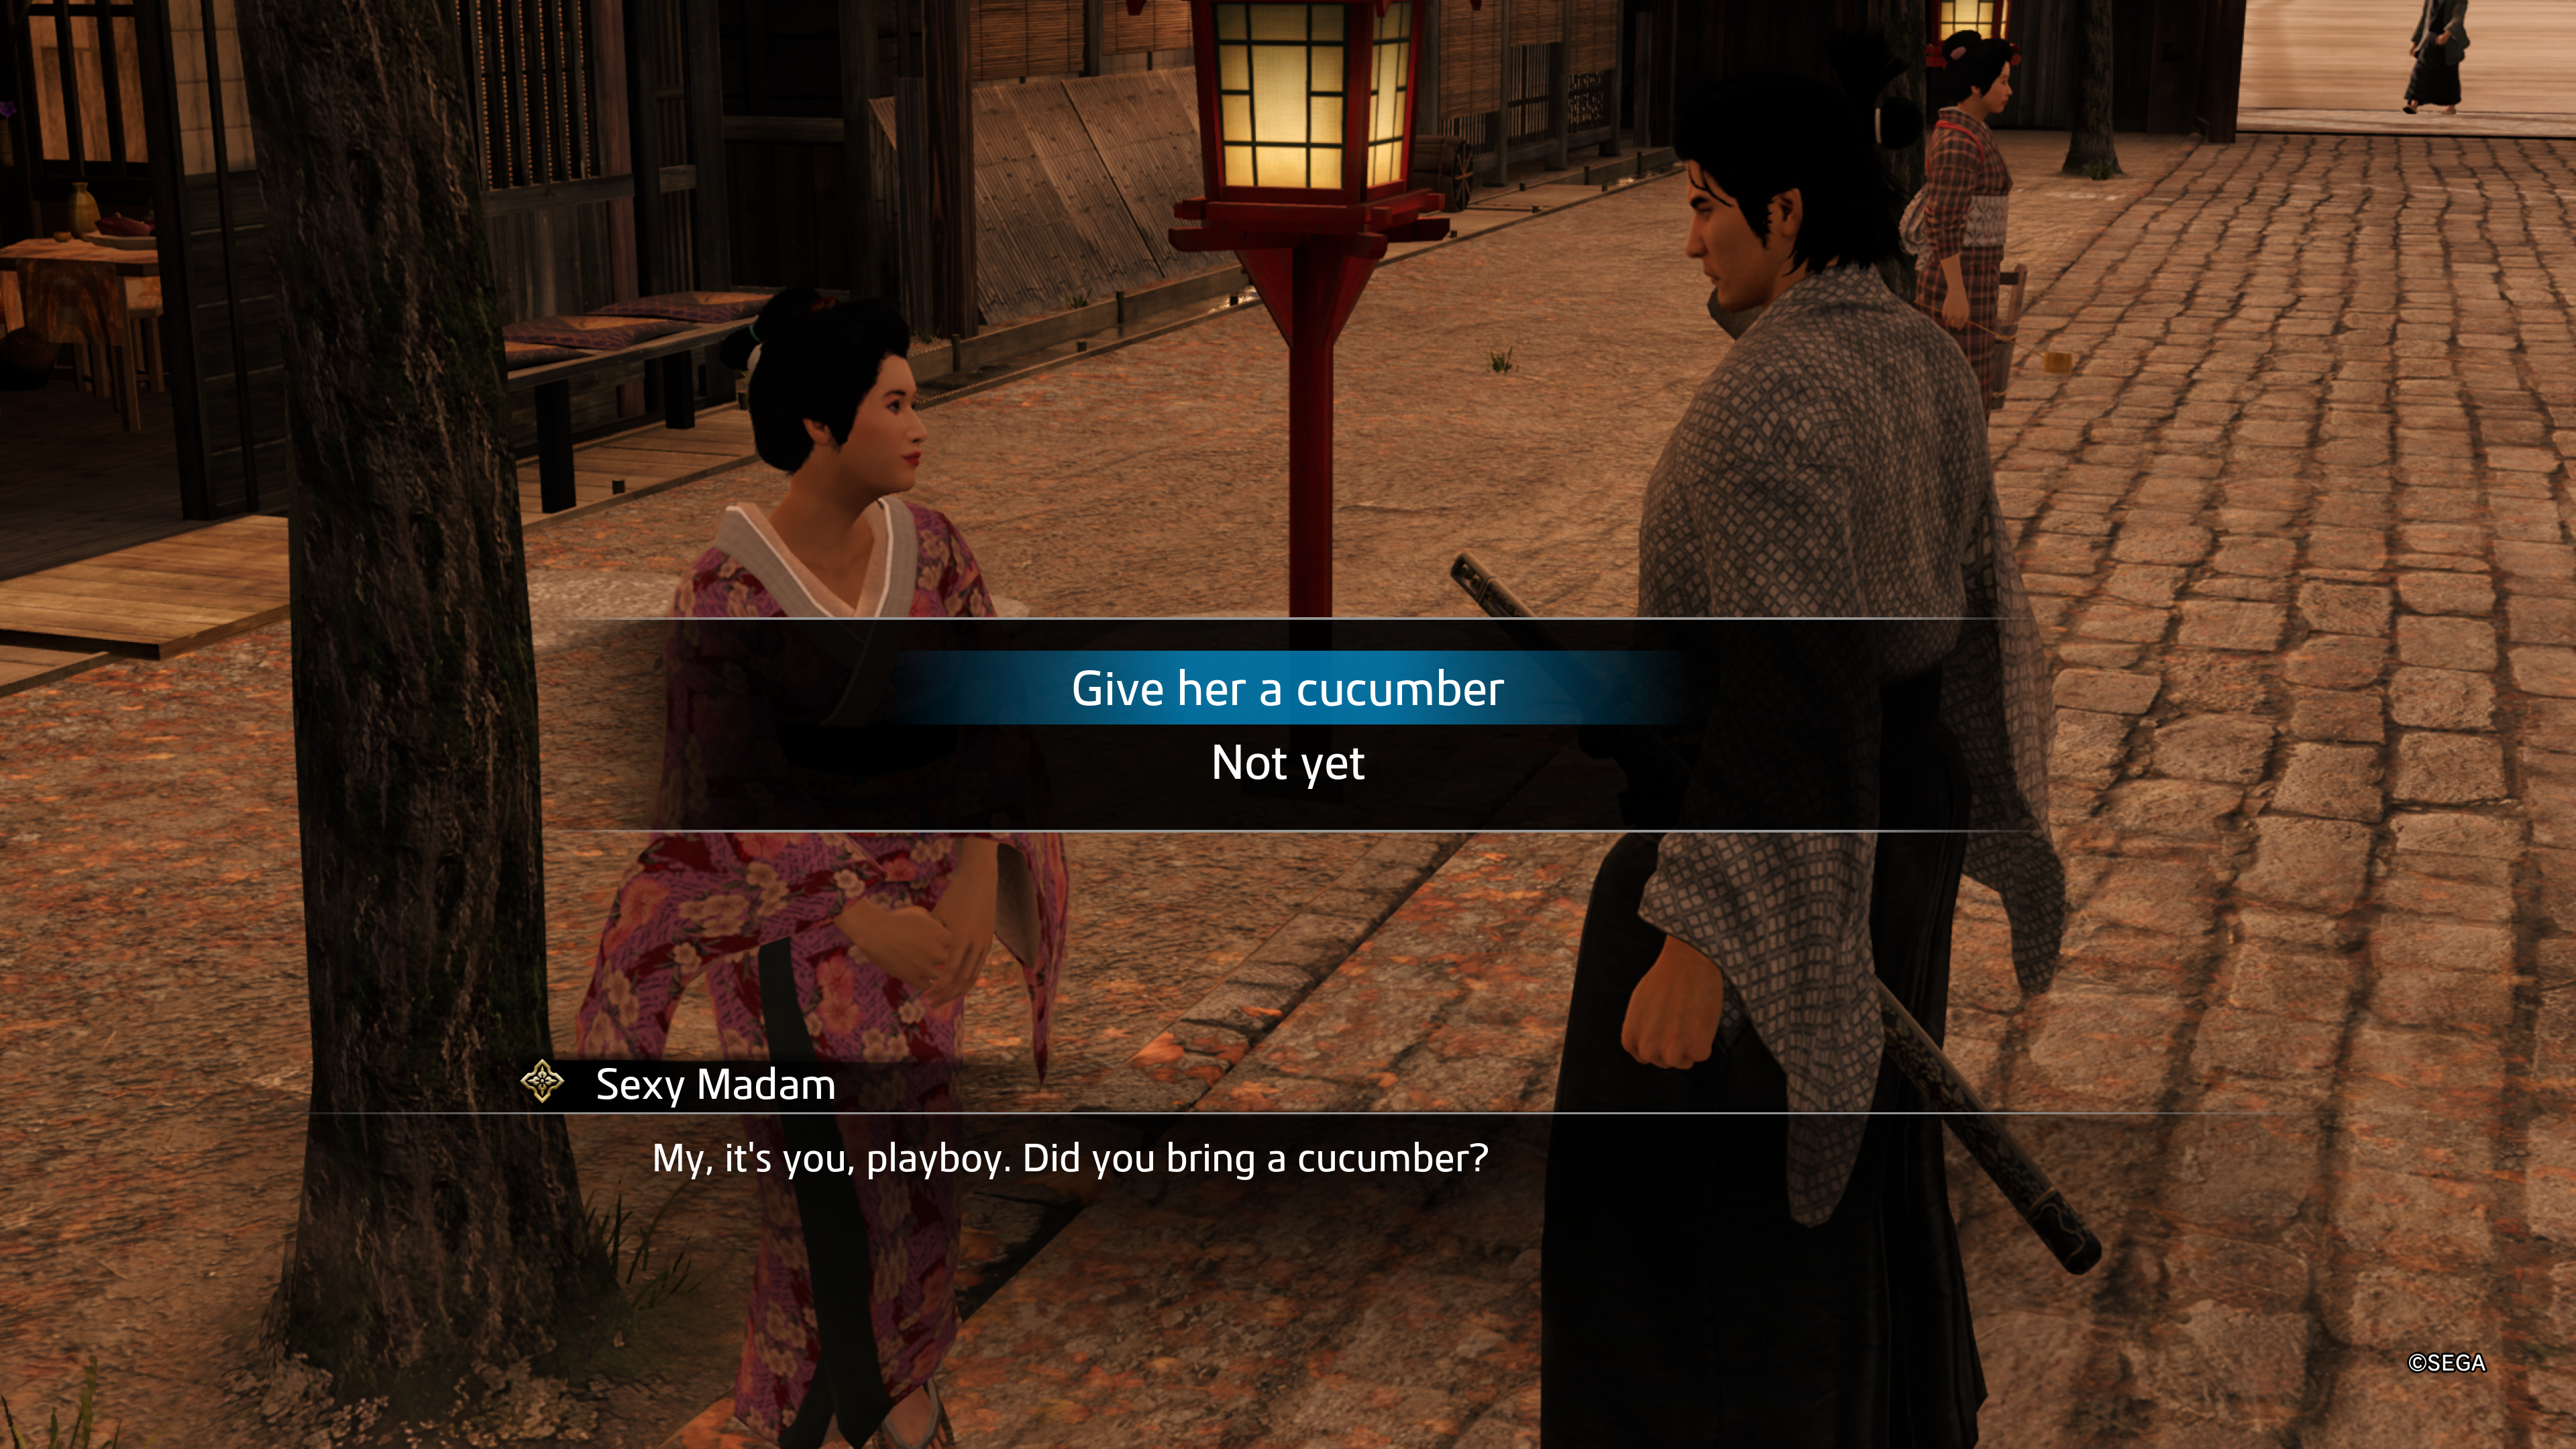 Like the Dragon Ishin comment - a lady named Sexy Lady asks if you brought her a cucumber, and the popup gives you the chance to give her one.